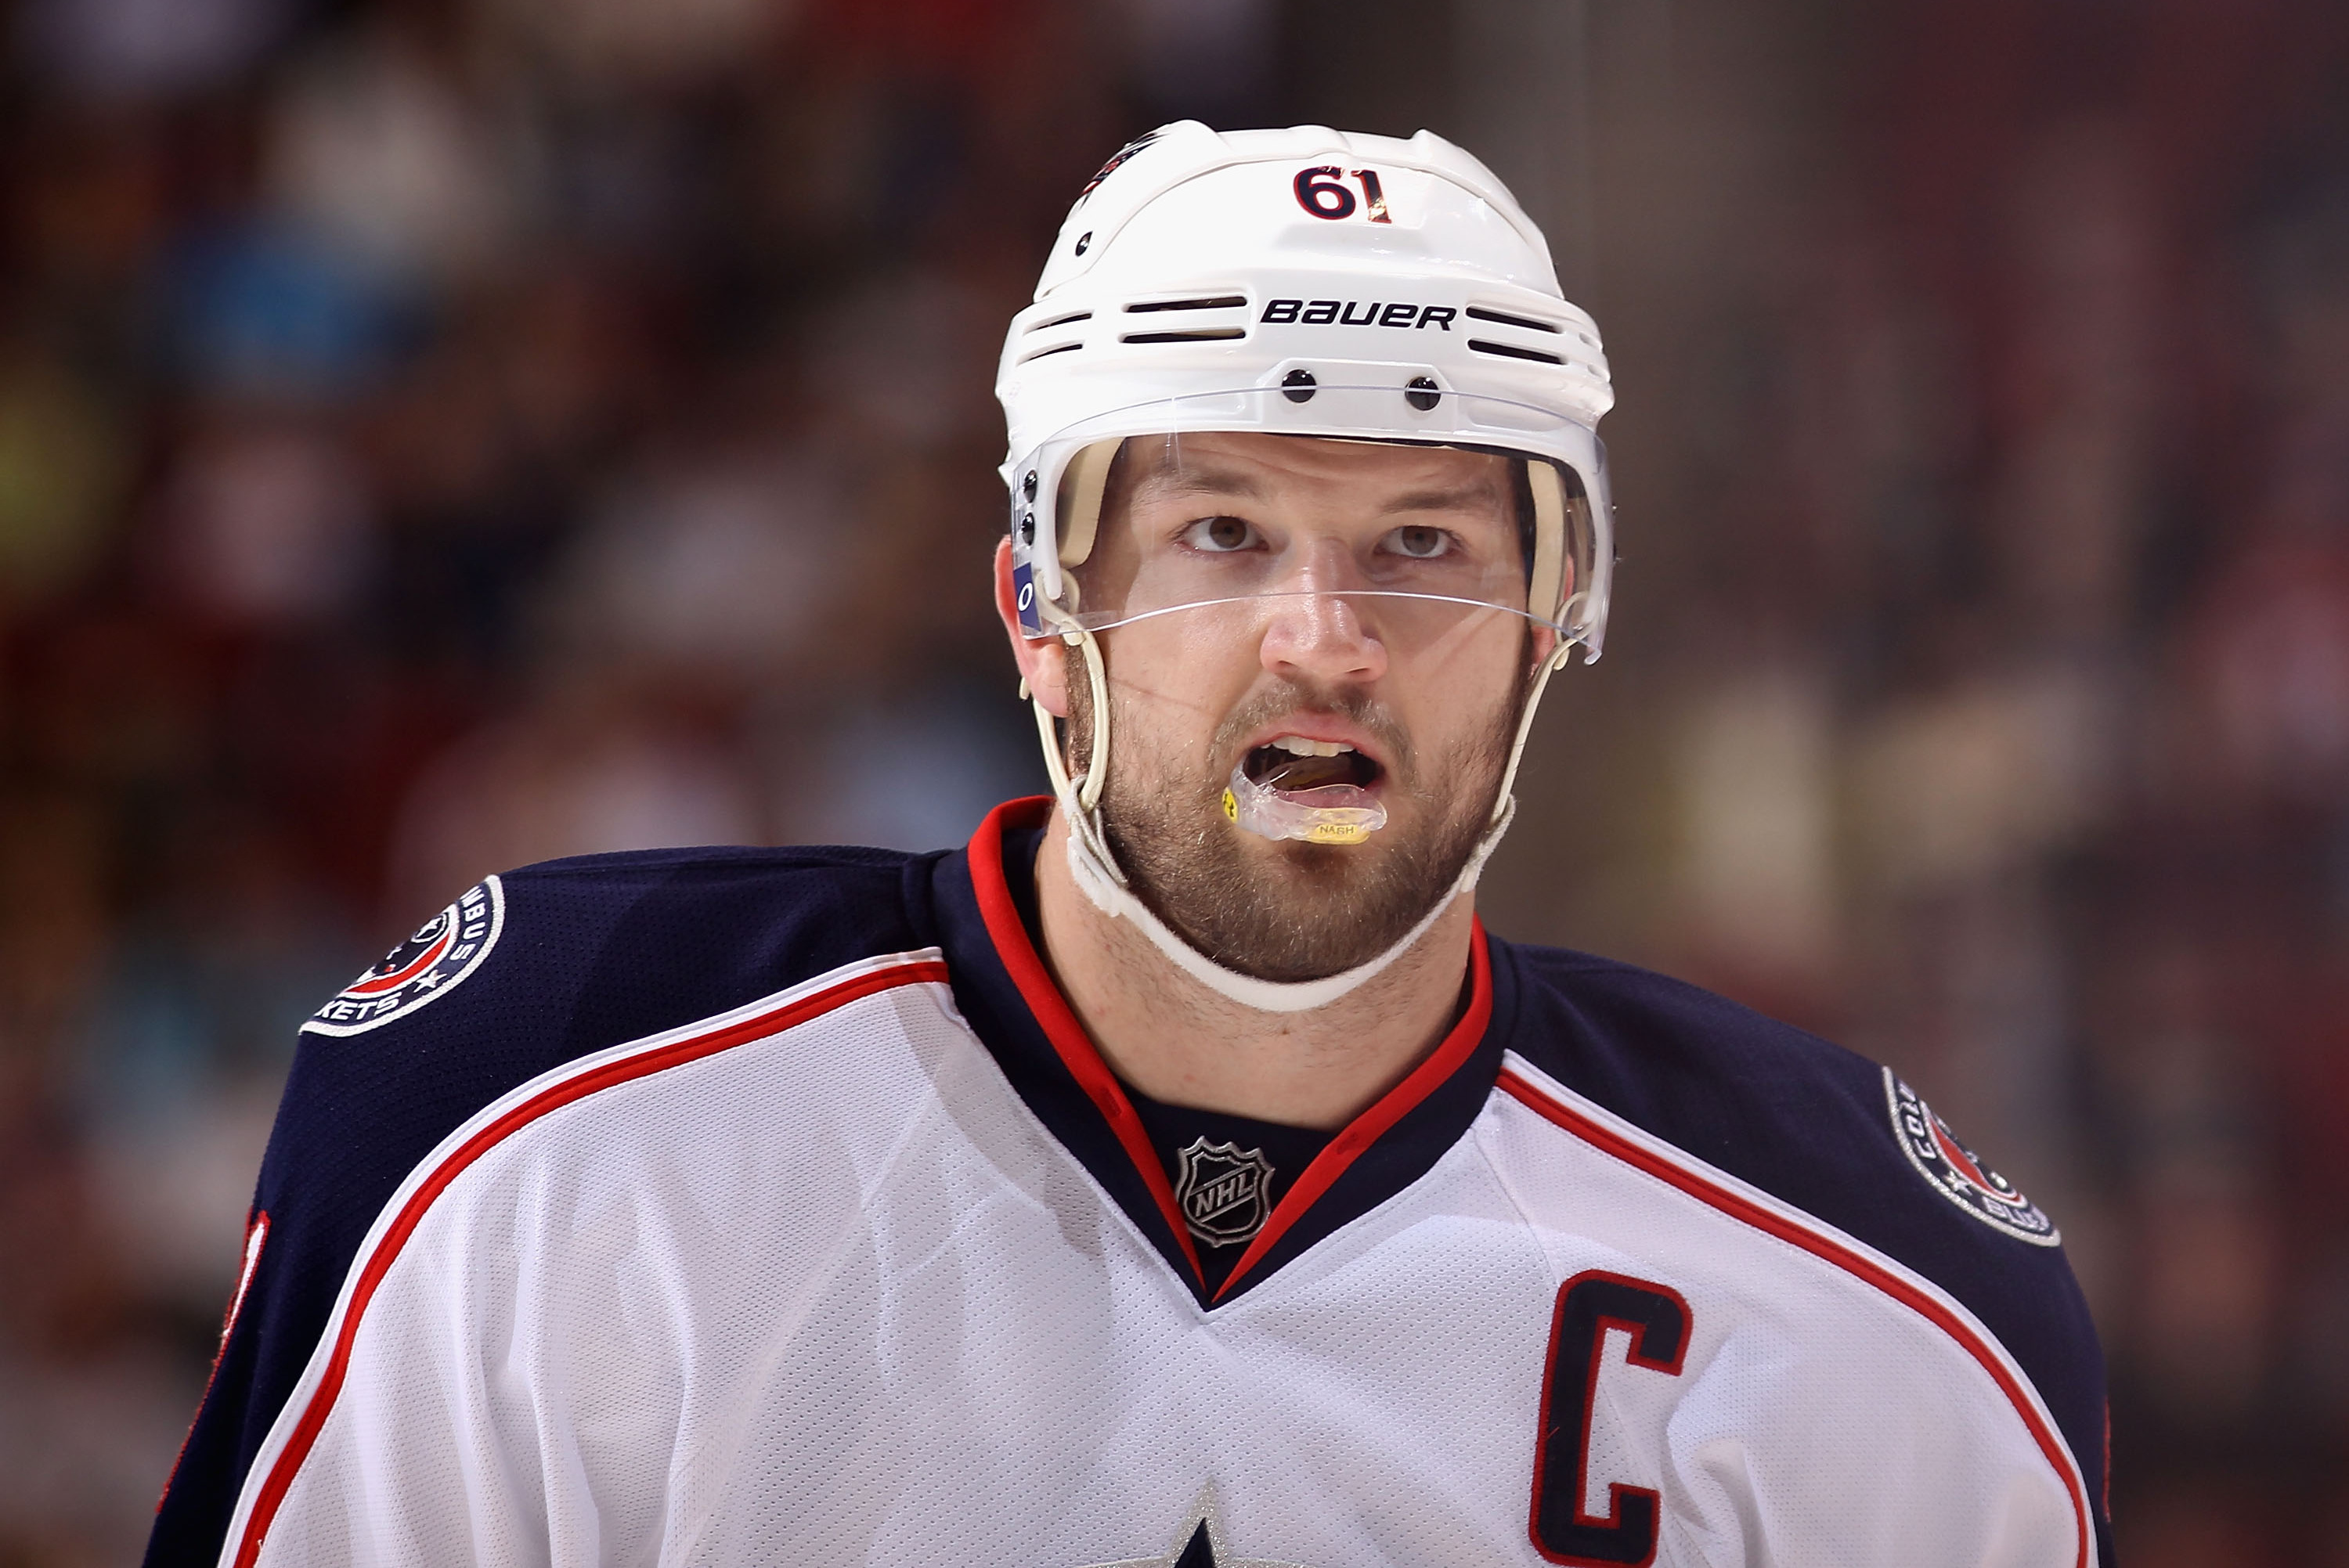 Blue Jackets Rick Nash to have jersey number retired Saturday, March 5